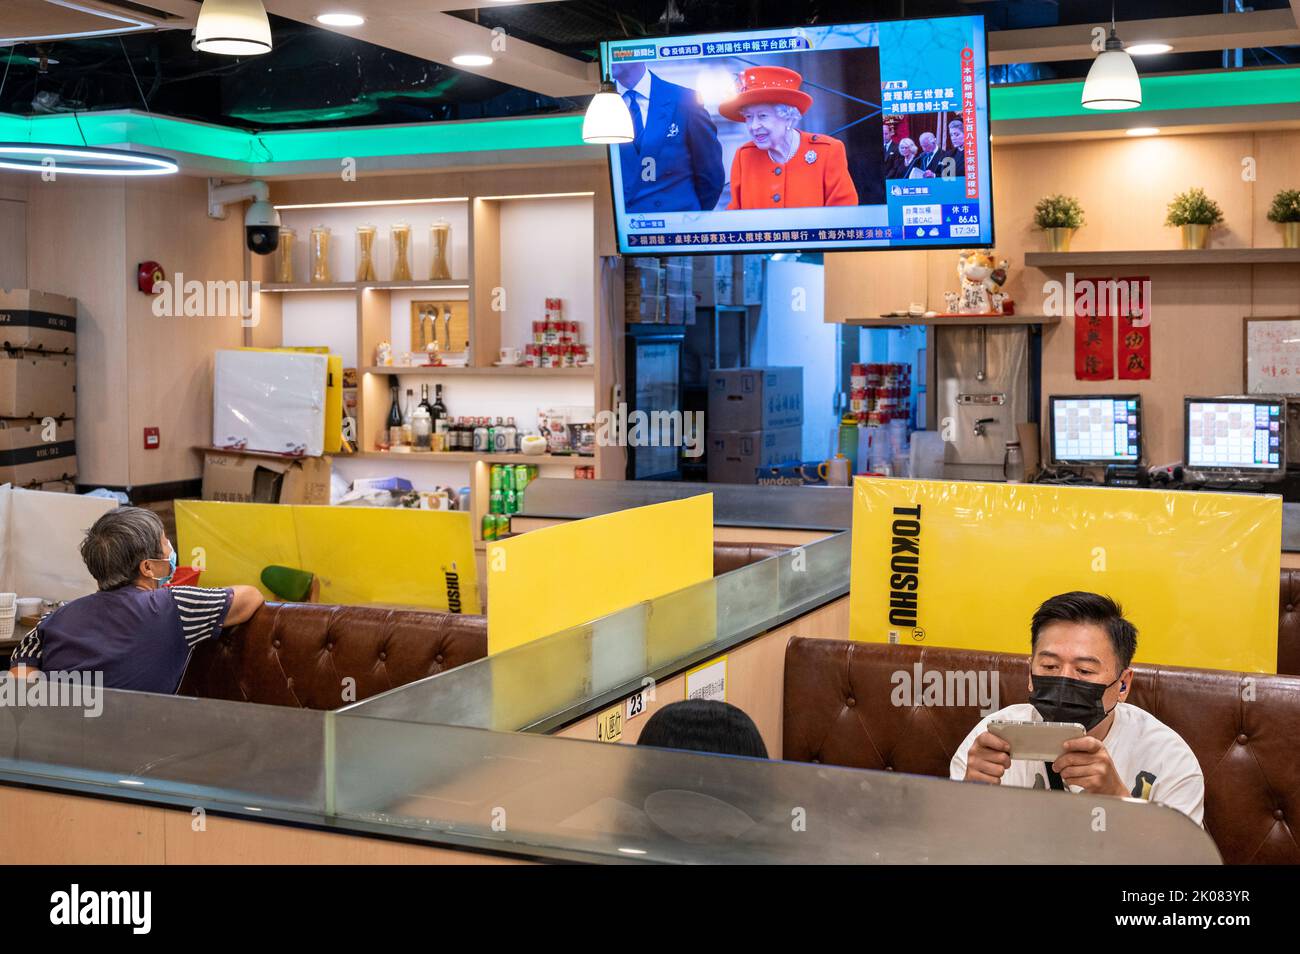 At a local restaurant in the former British colony of Hong Kong, customers eat lunch, a TV news channel shows an image of the longest-serving monarch Queen Elizabeth II a day after her death. Stock Photo